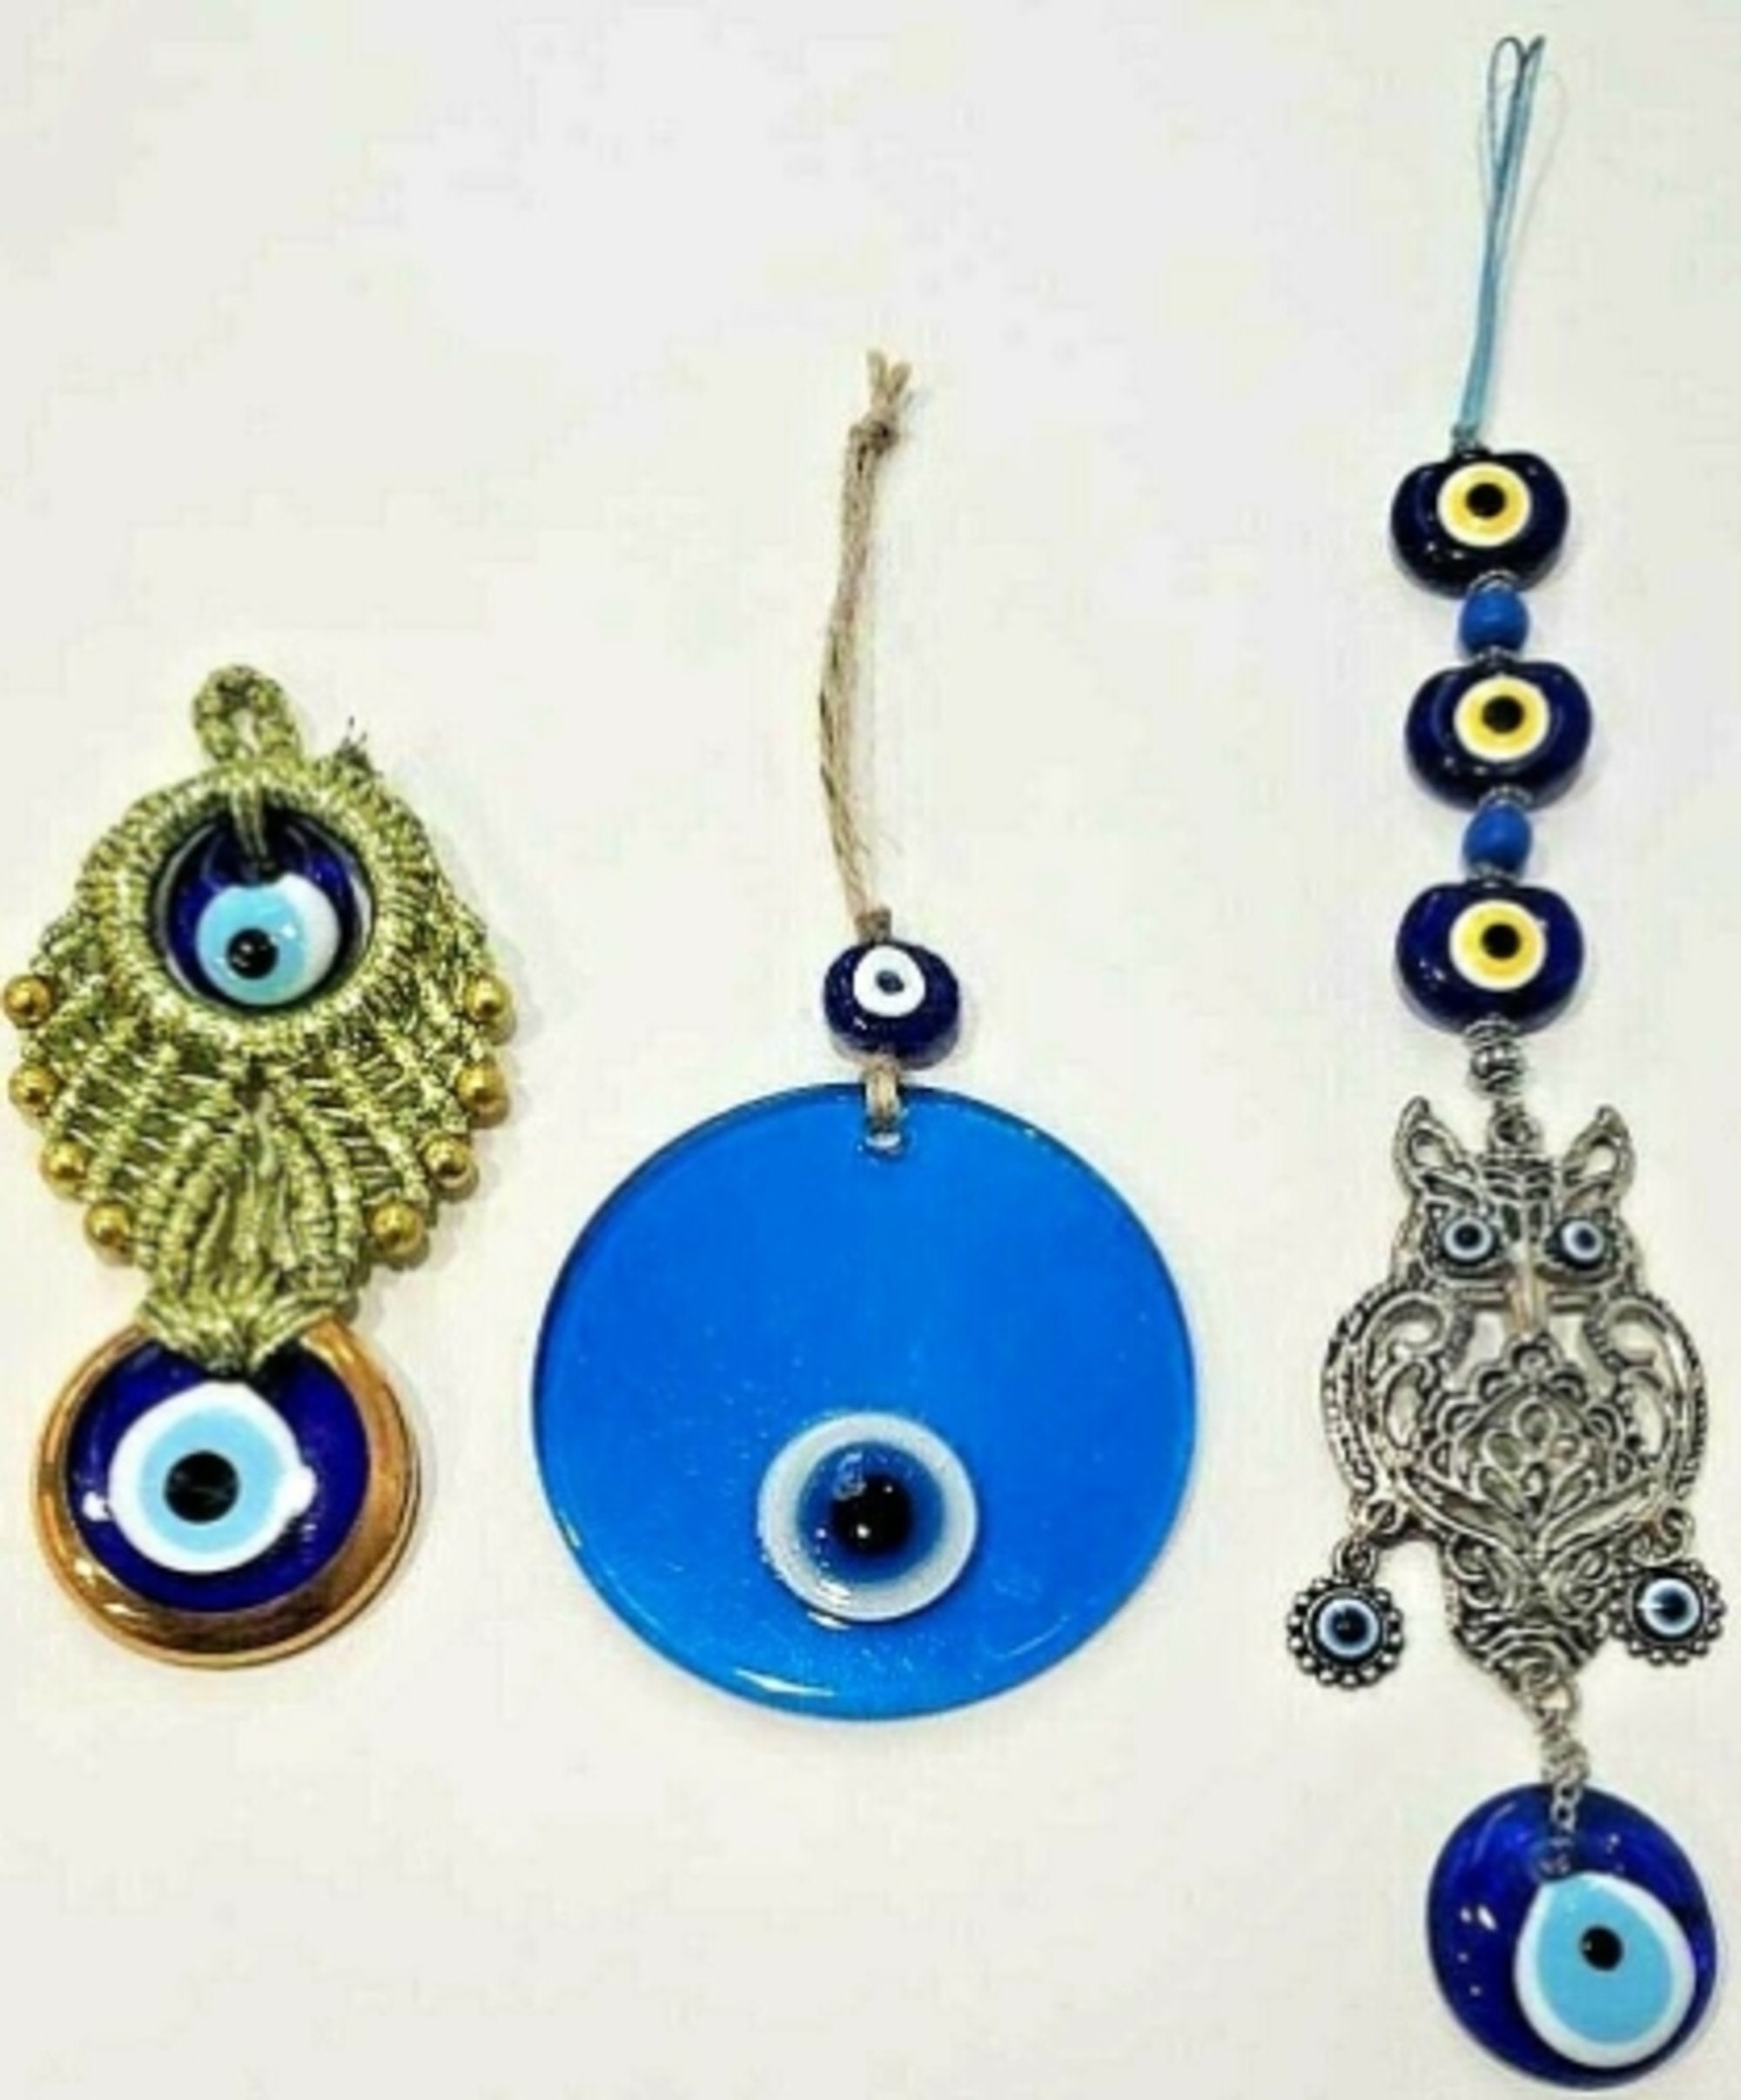 5 “ inch Nazar EvilEye Golden Color Rounded Large WallHanging BadLuck Protection 